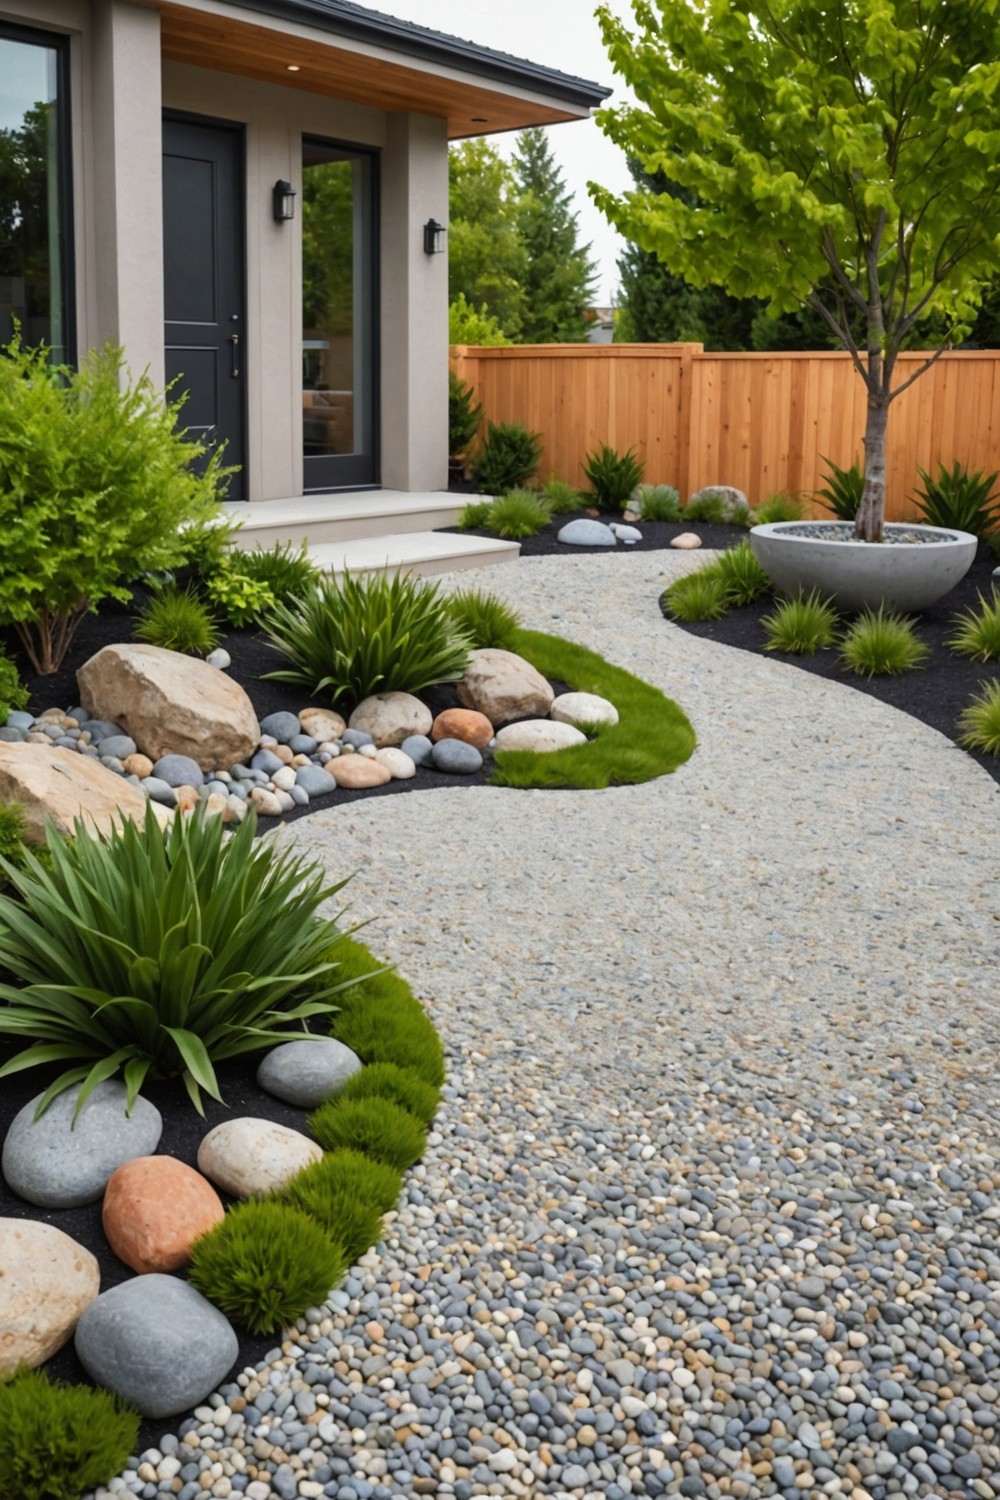 Using Gravel and Pebbles to Create a Low-Maintenance Yard